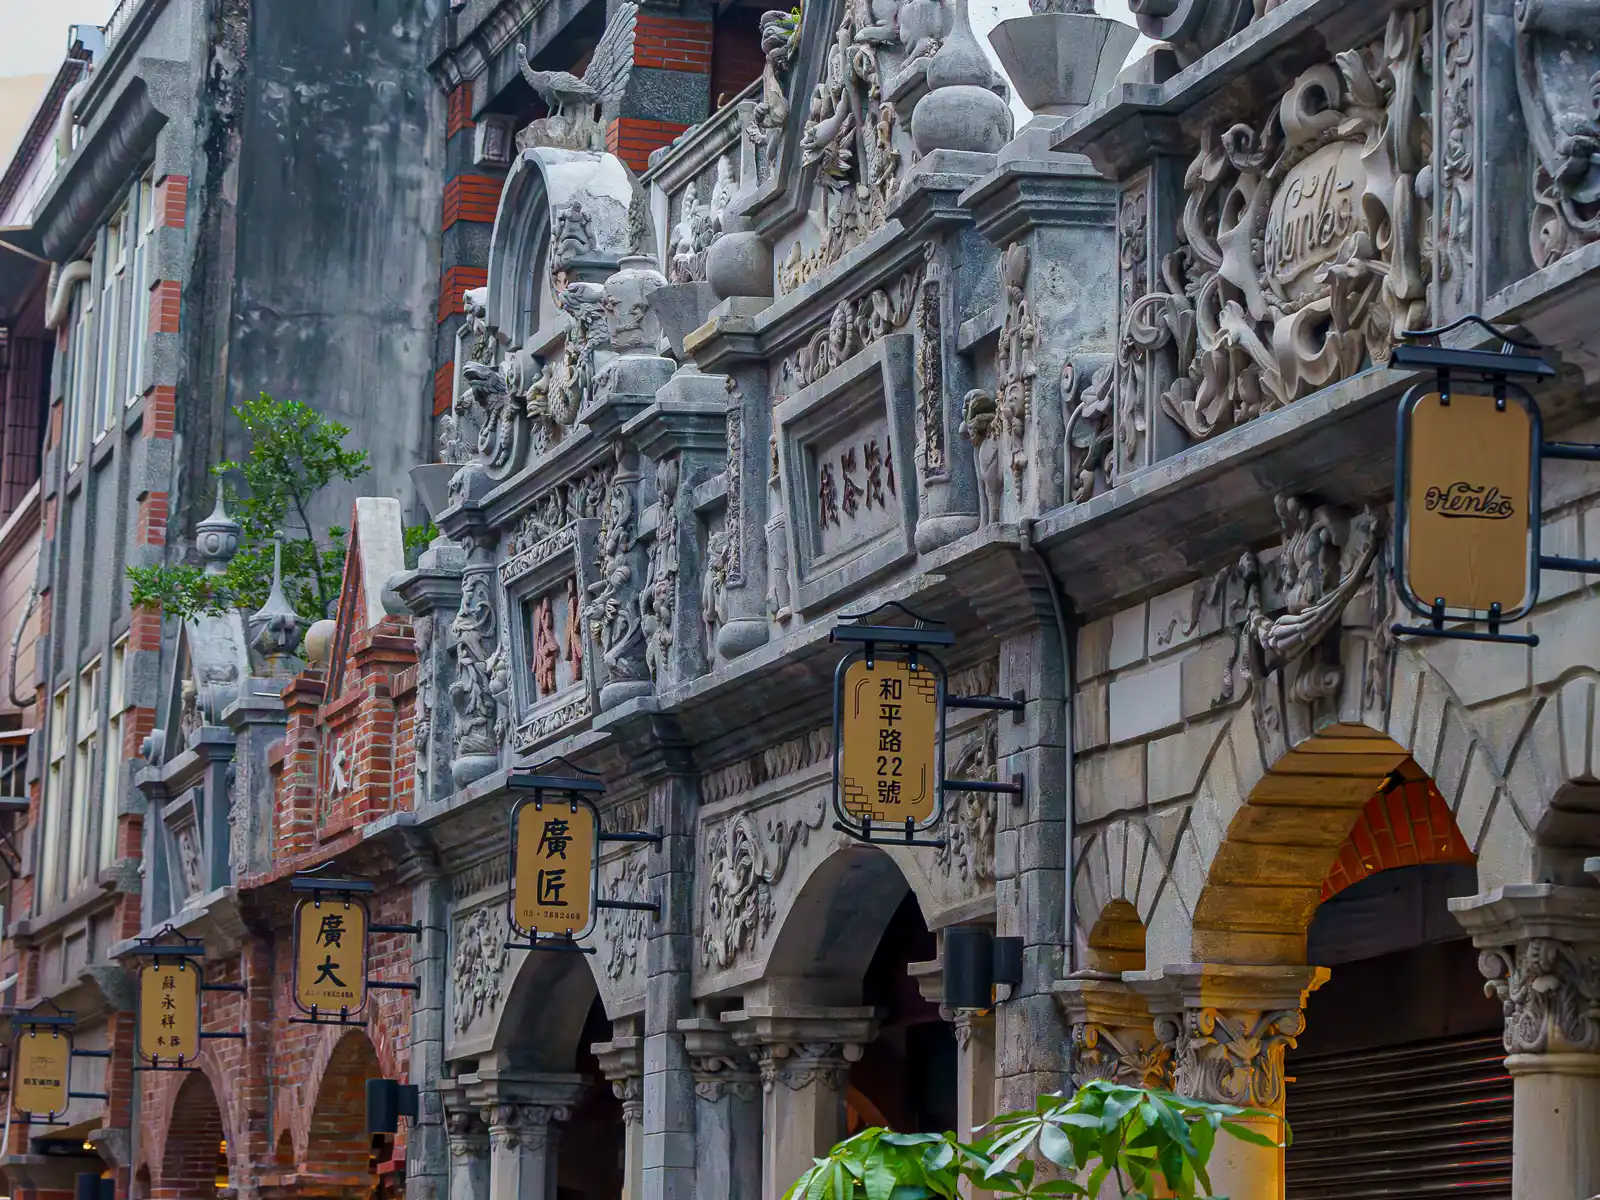 The facades of storefronts on Daxi Old Street are decorated with intricate stone reliefs.